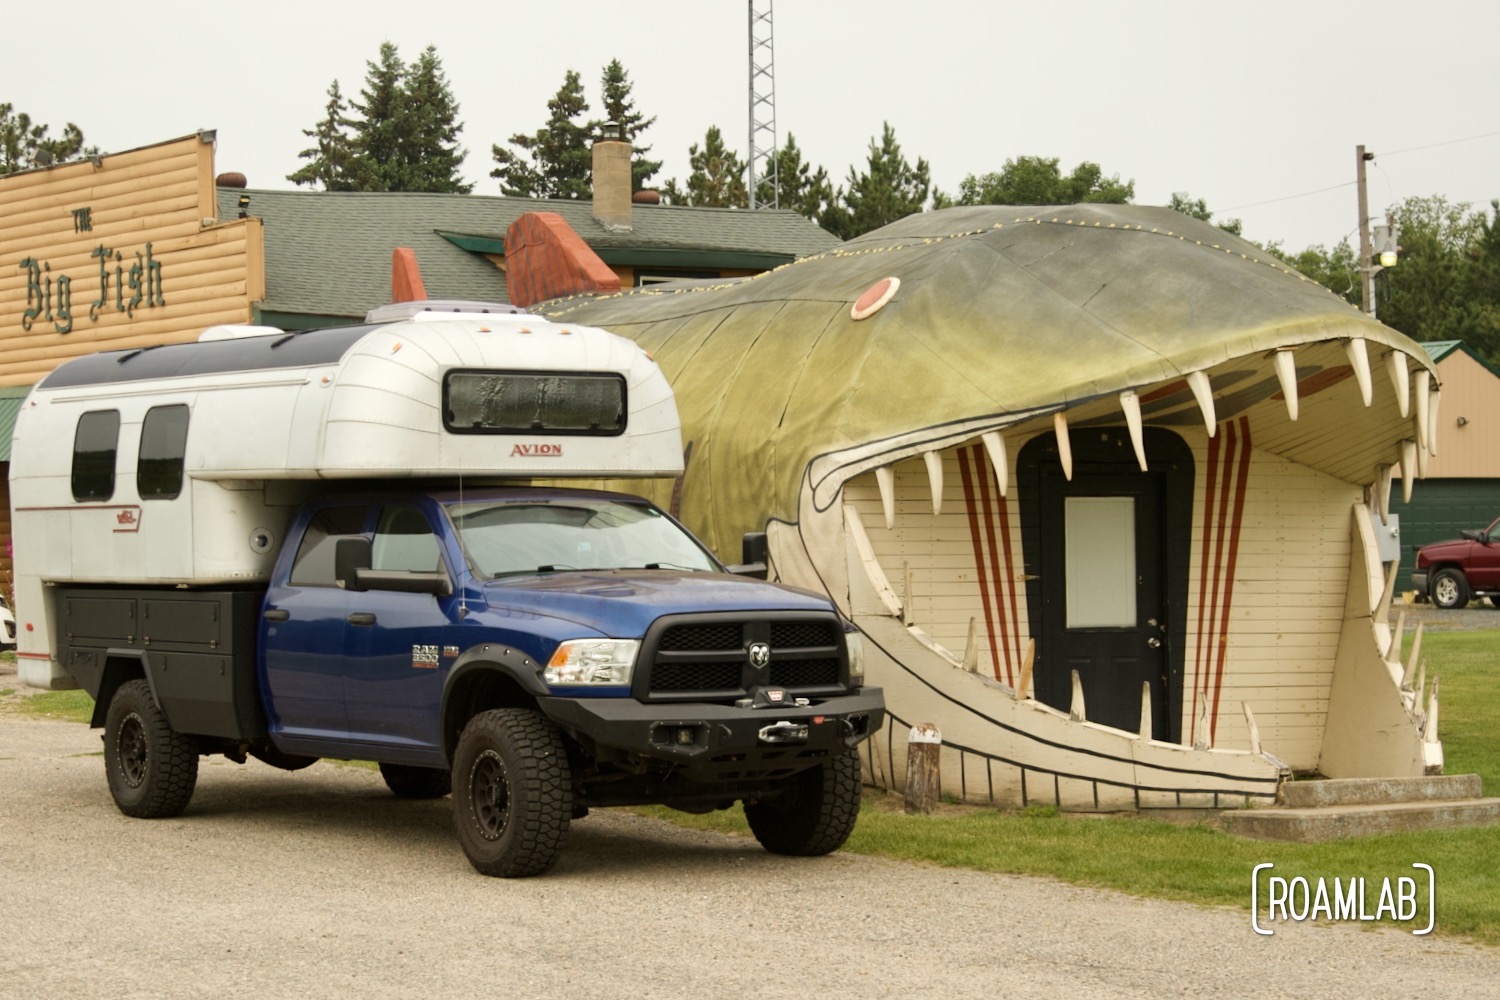 1970 Avion C11 truck camper parked next to a house sized fish in front of a fisherman's super club called The Big Fish off Minnesota’s Great River Road.